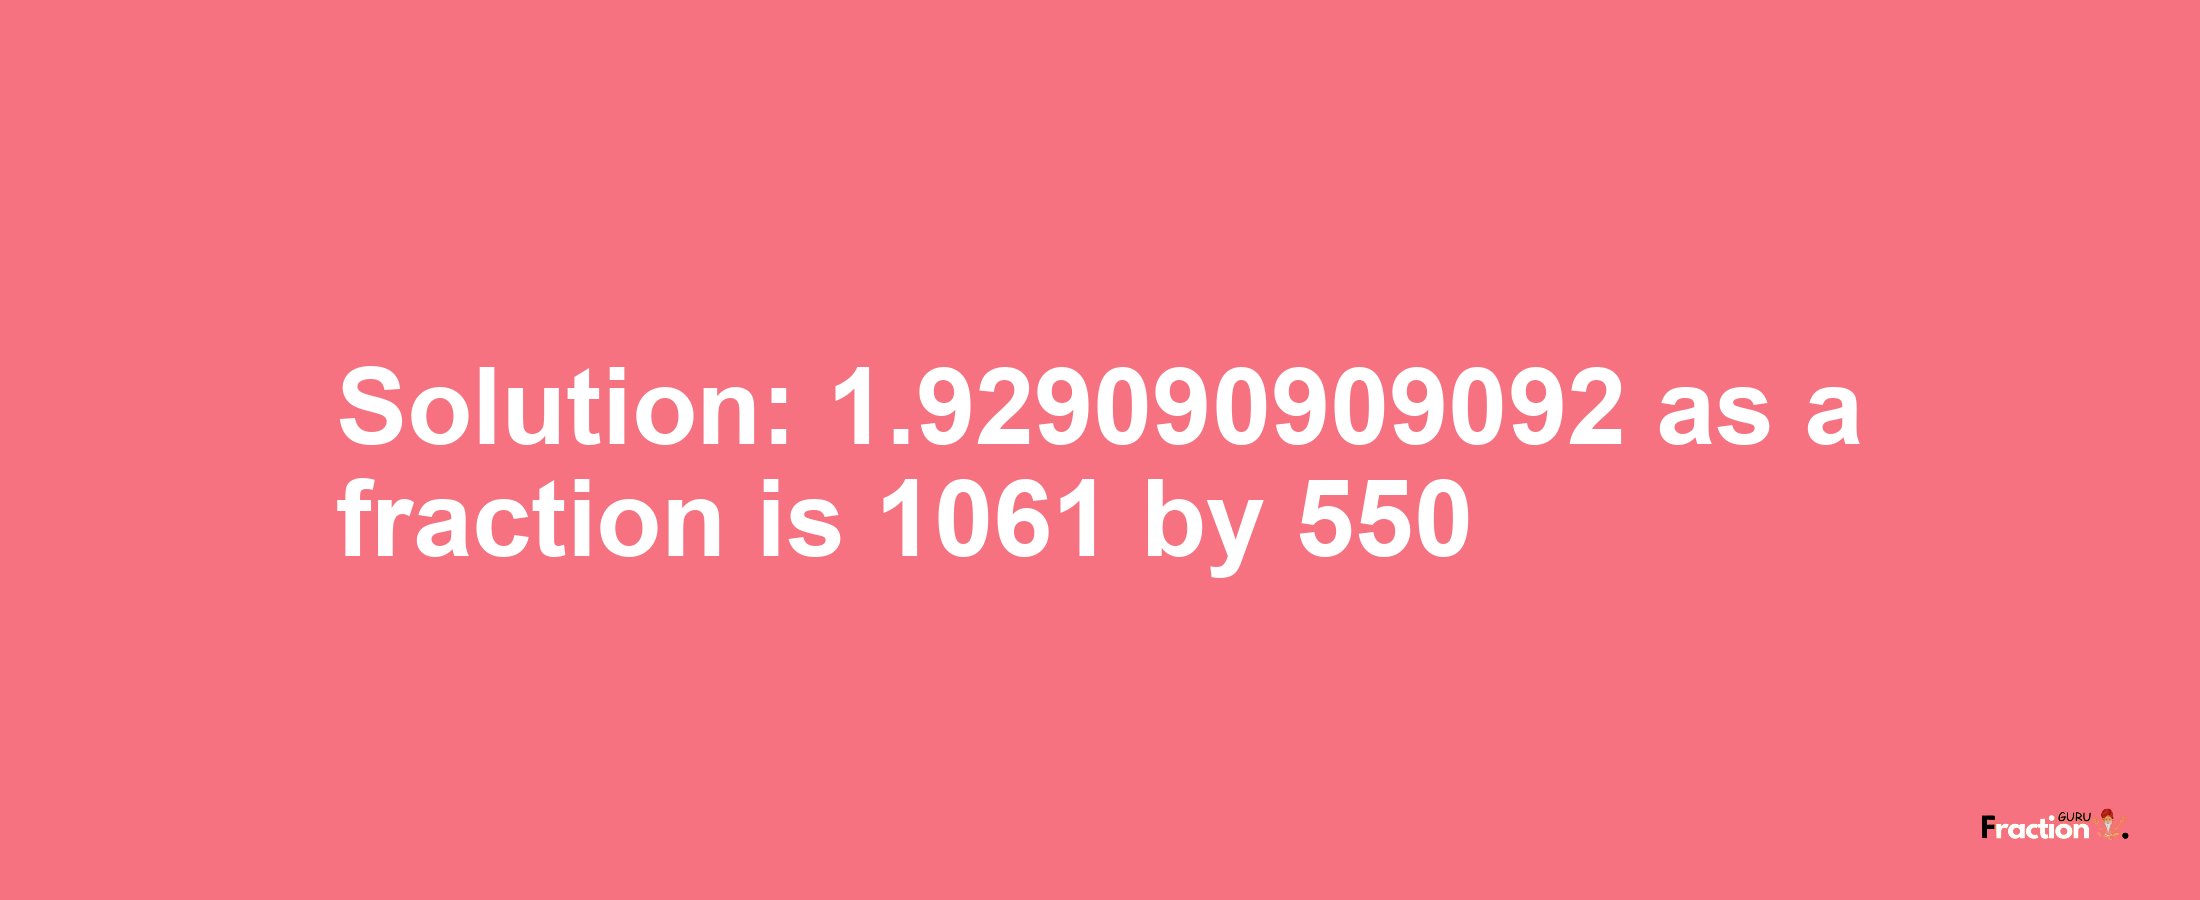 Solution:1.929090909092 as a fraction is 1061/550